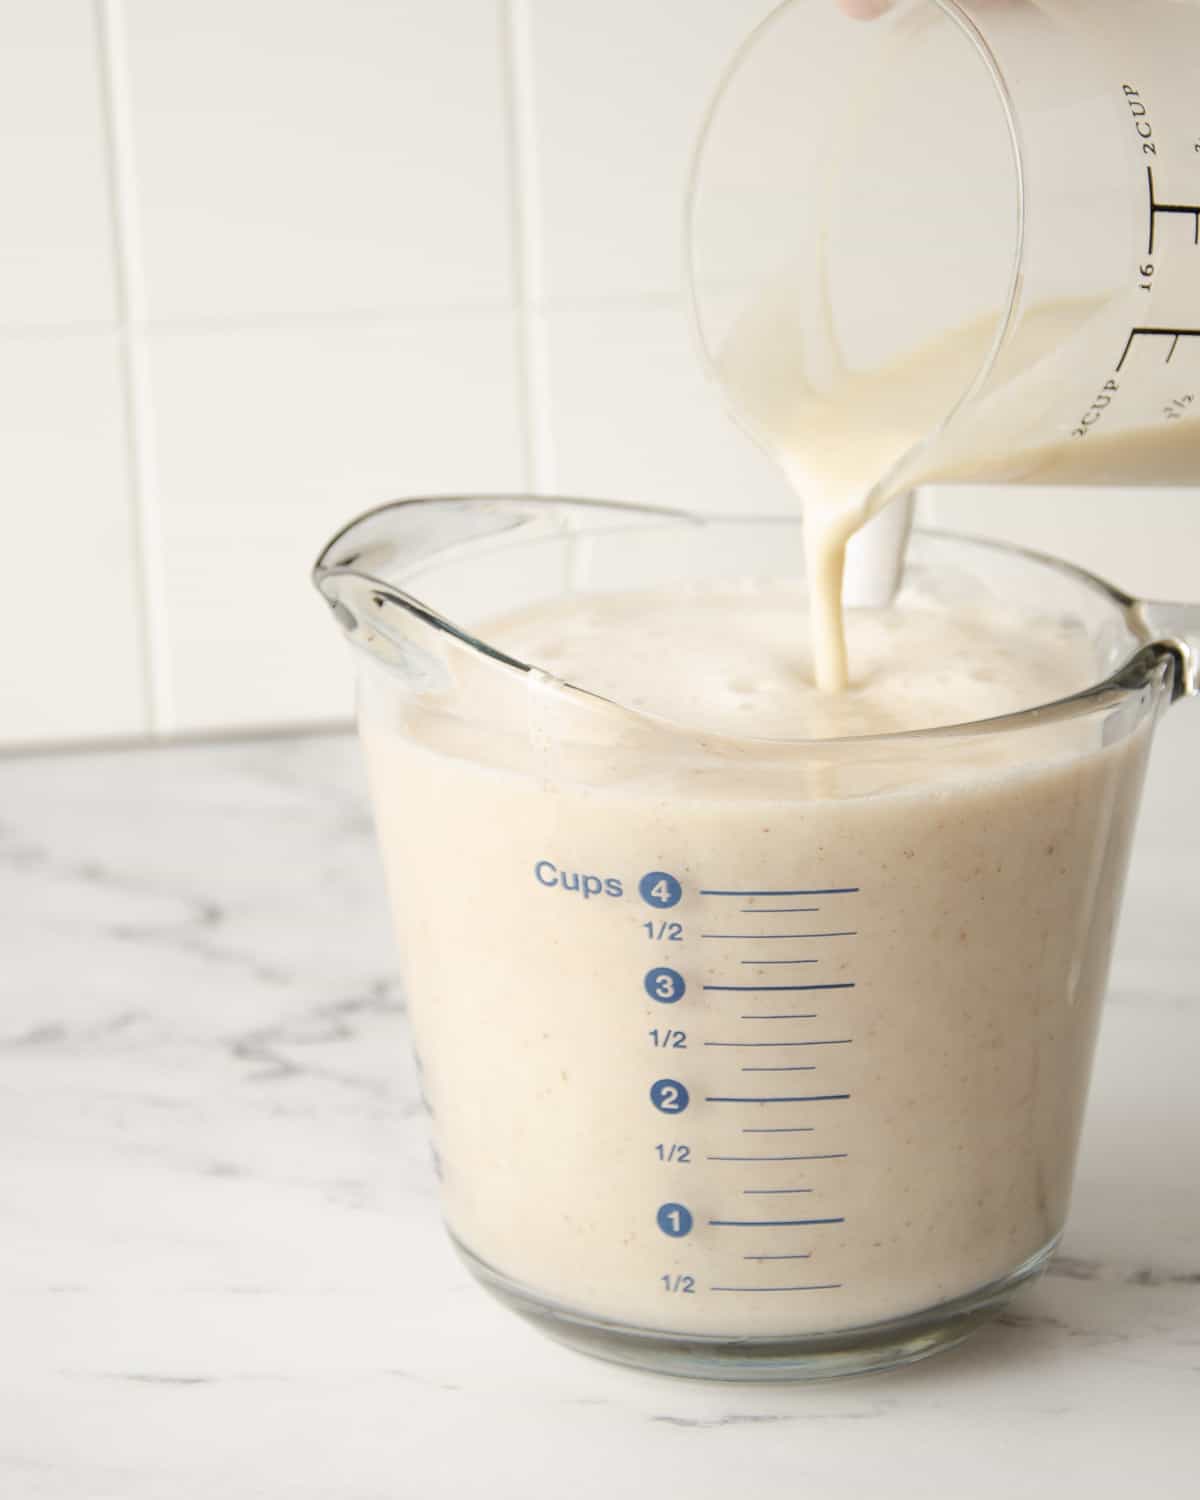 Pouring milk into blended horchata in a glass measuring cup.